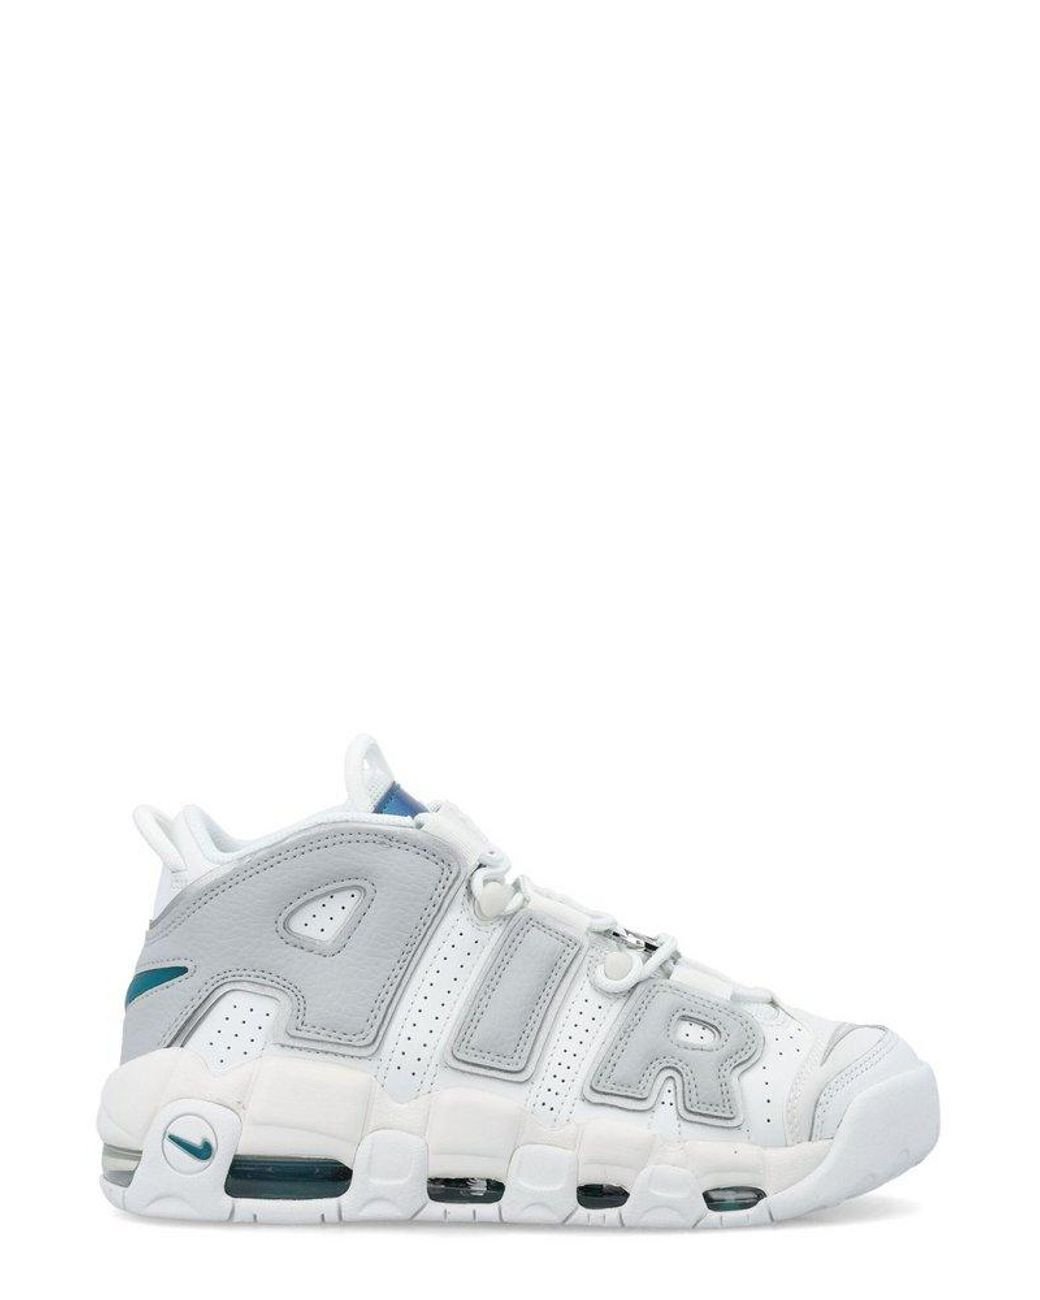 Nike Synthetic Air More Uptempo Shoes White | Lyst